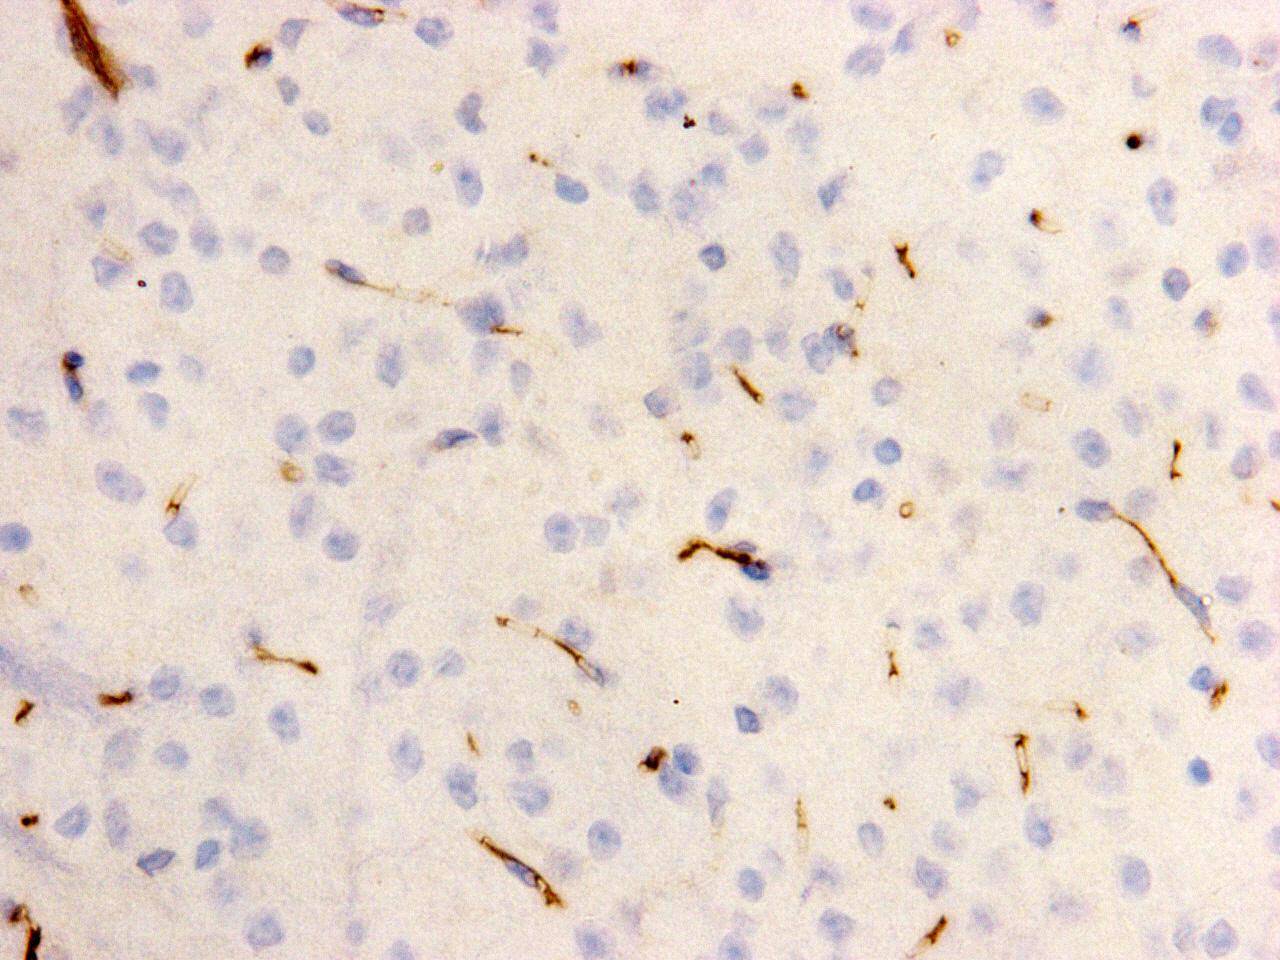 Immunohistochemical analysis of paraffin- embedded mouse brain tissue using anti-Kidins220 Mouse mAb (Cat. # M0910-4).